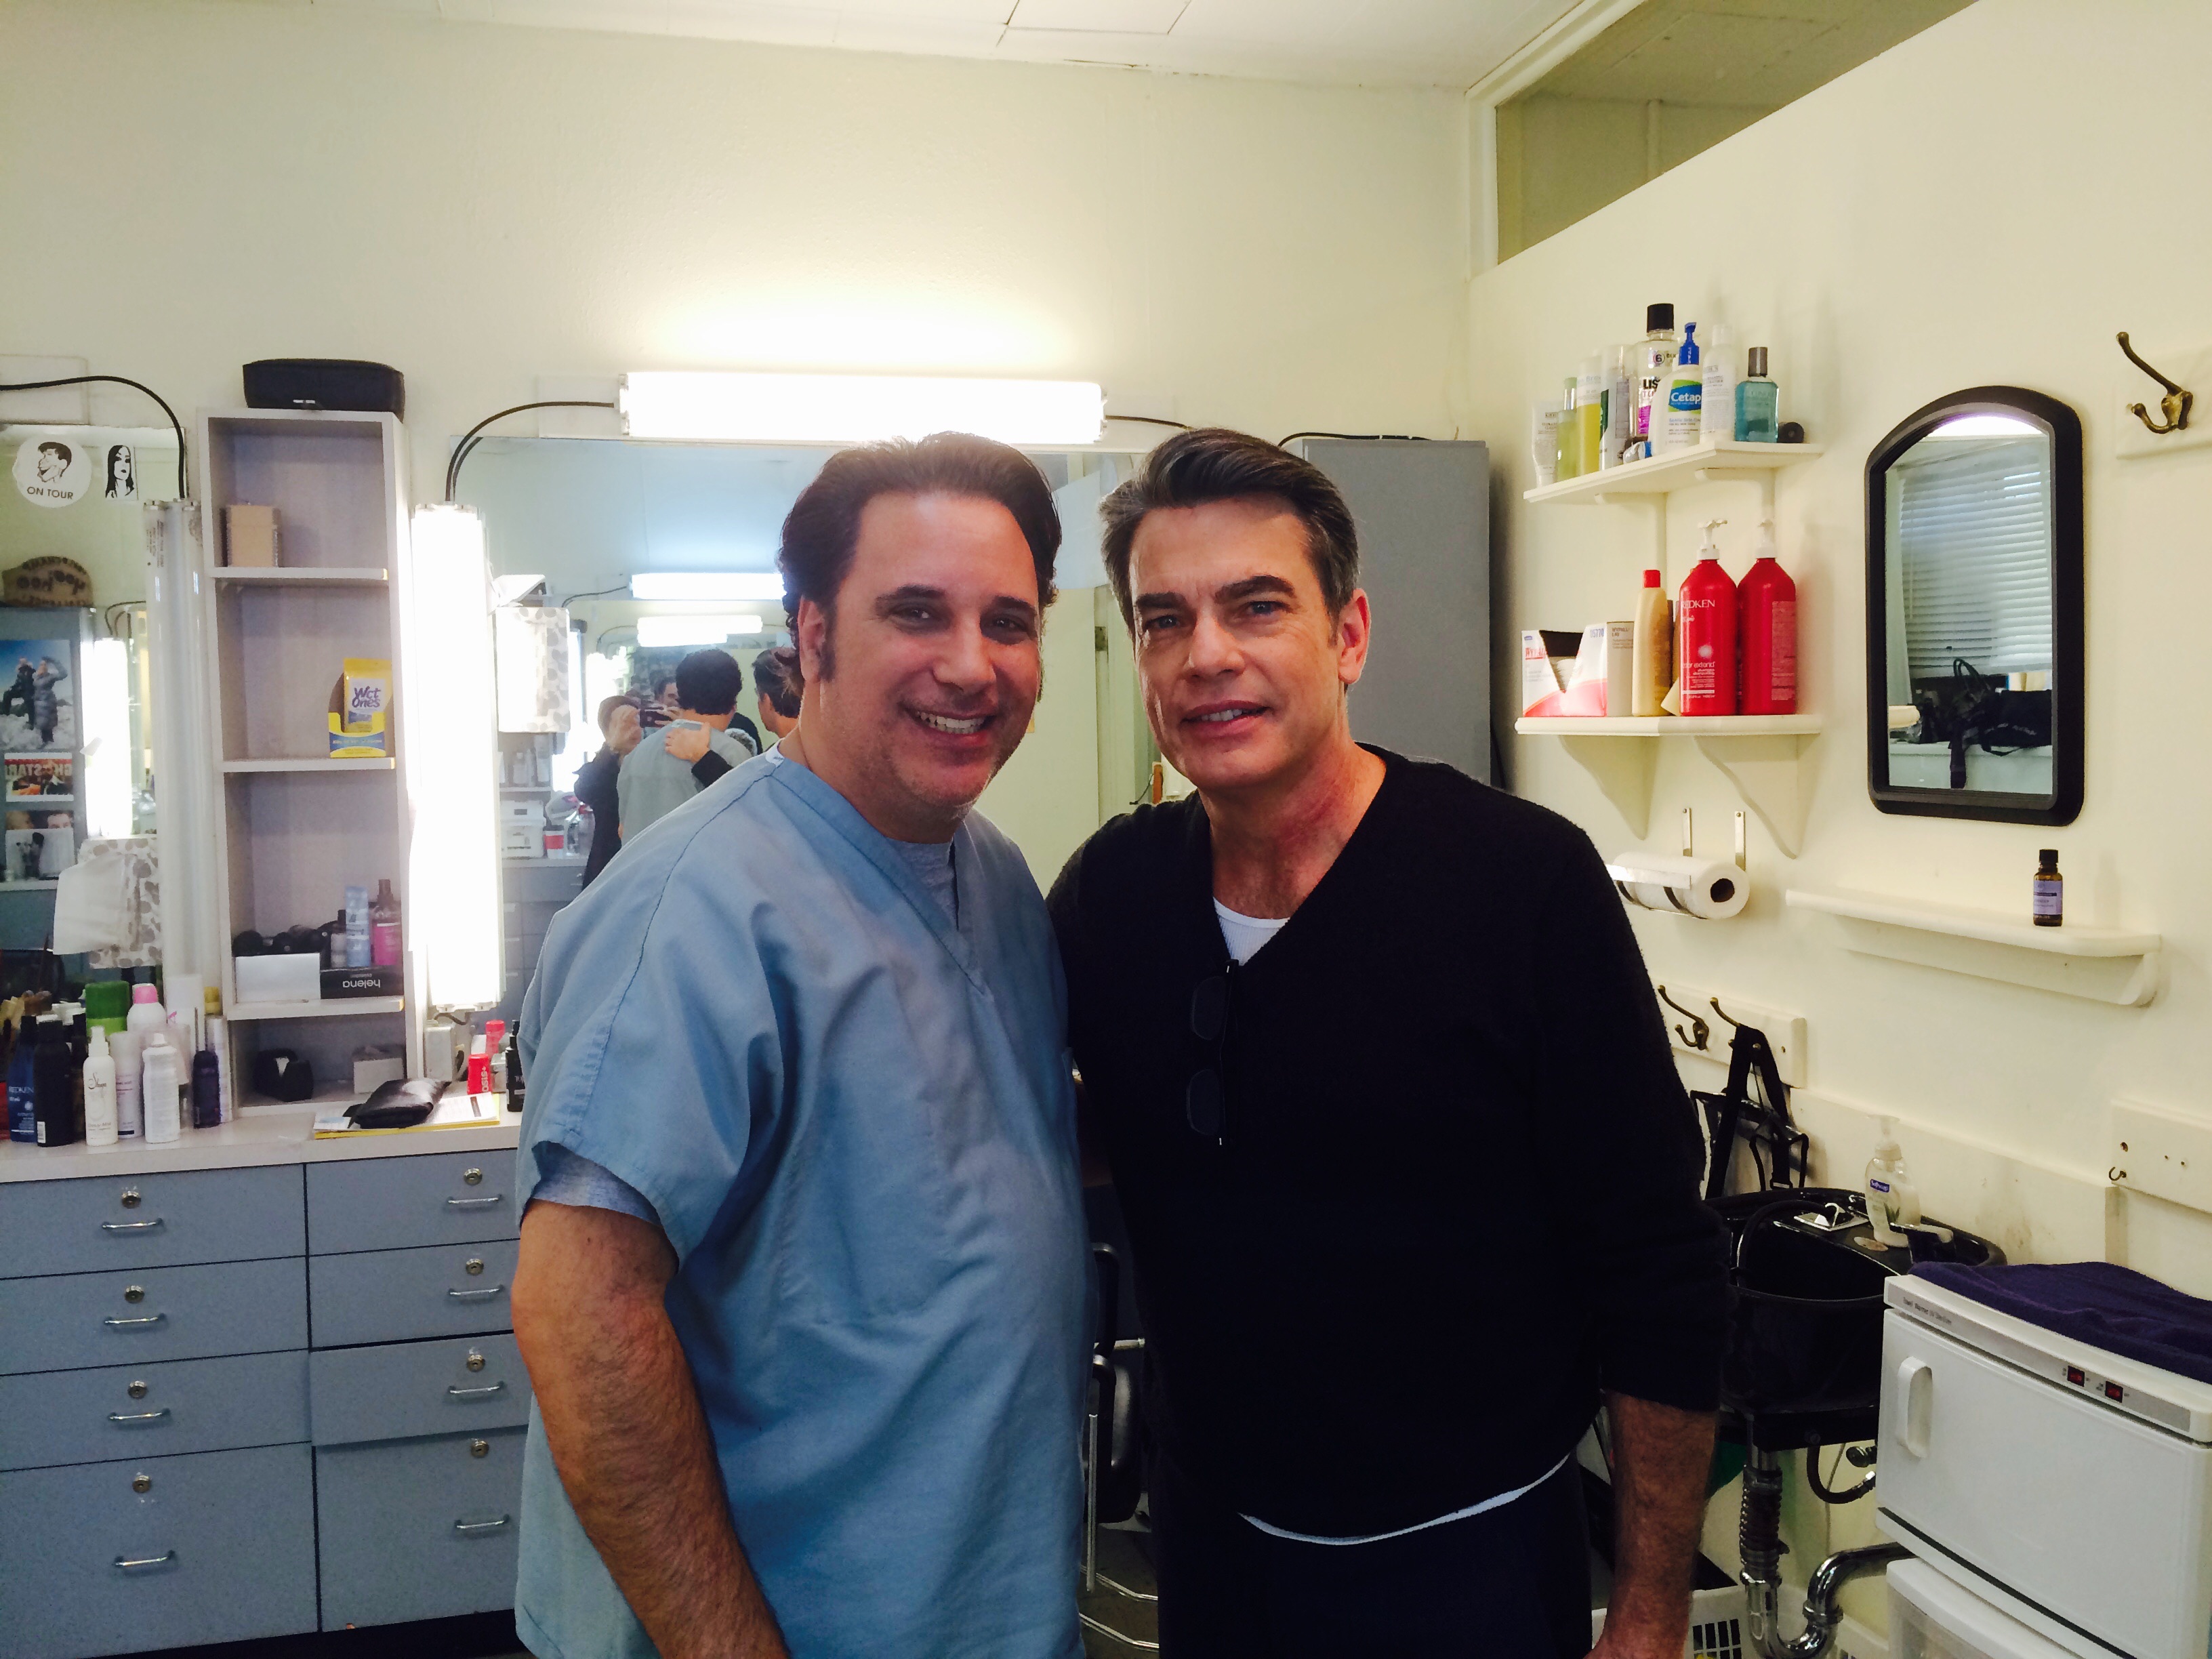 Guest starring as Dr. Conklin opposite Peter Gallagher this season on LAW AND ORDER:SVU.